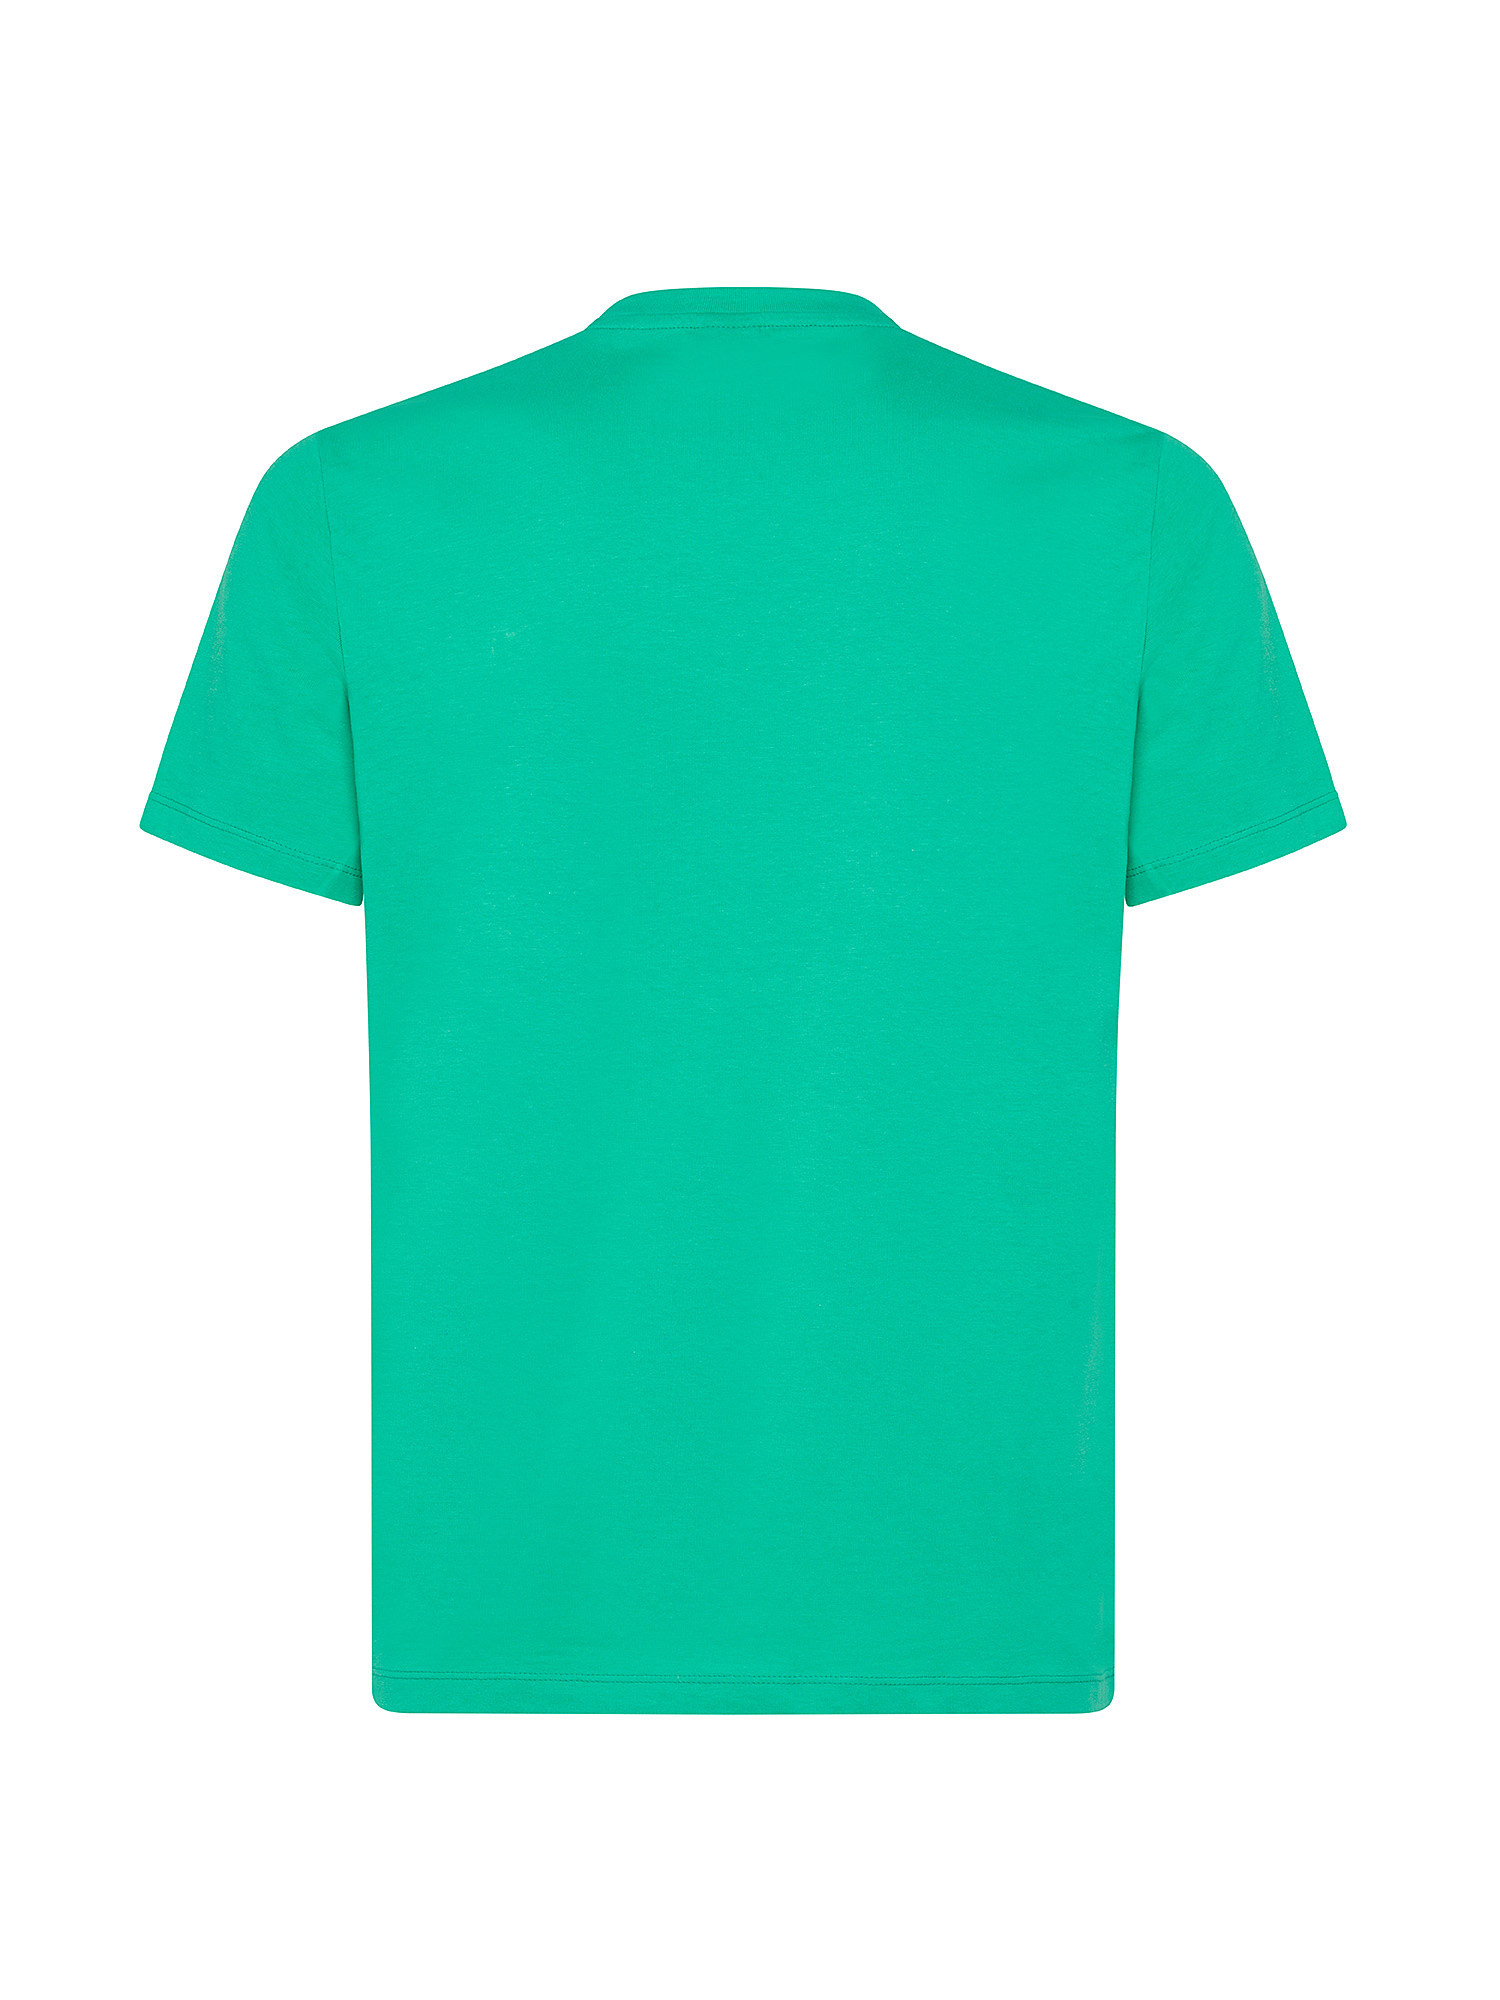 North Sails - Organic cotton jersey T-shirt with micrologo, Green, large image number 1